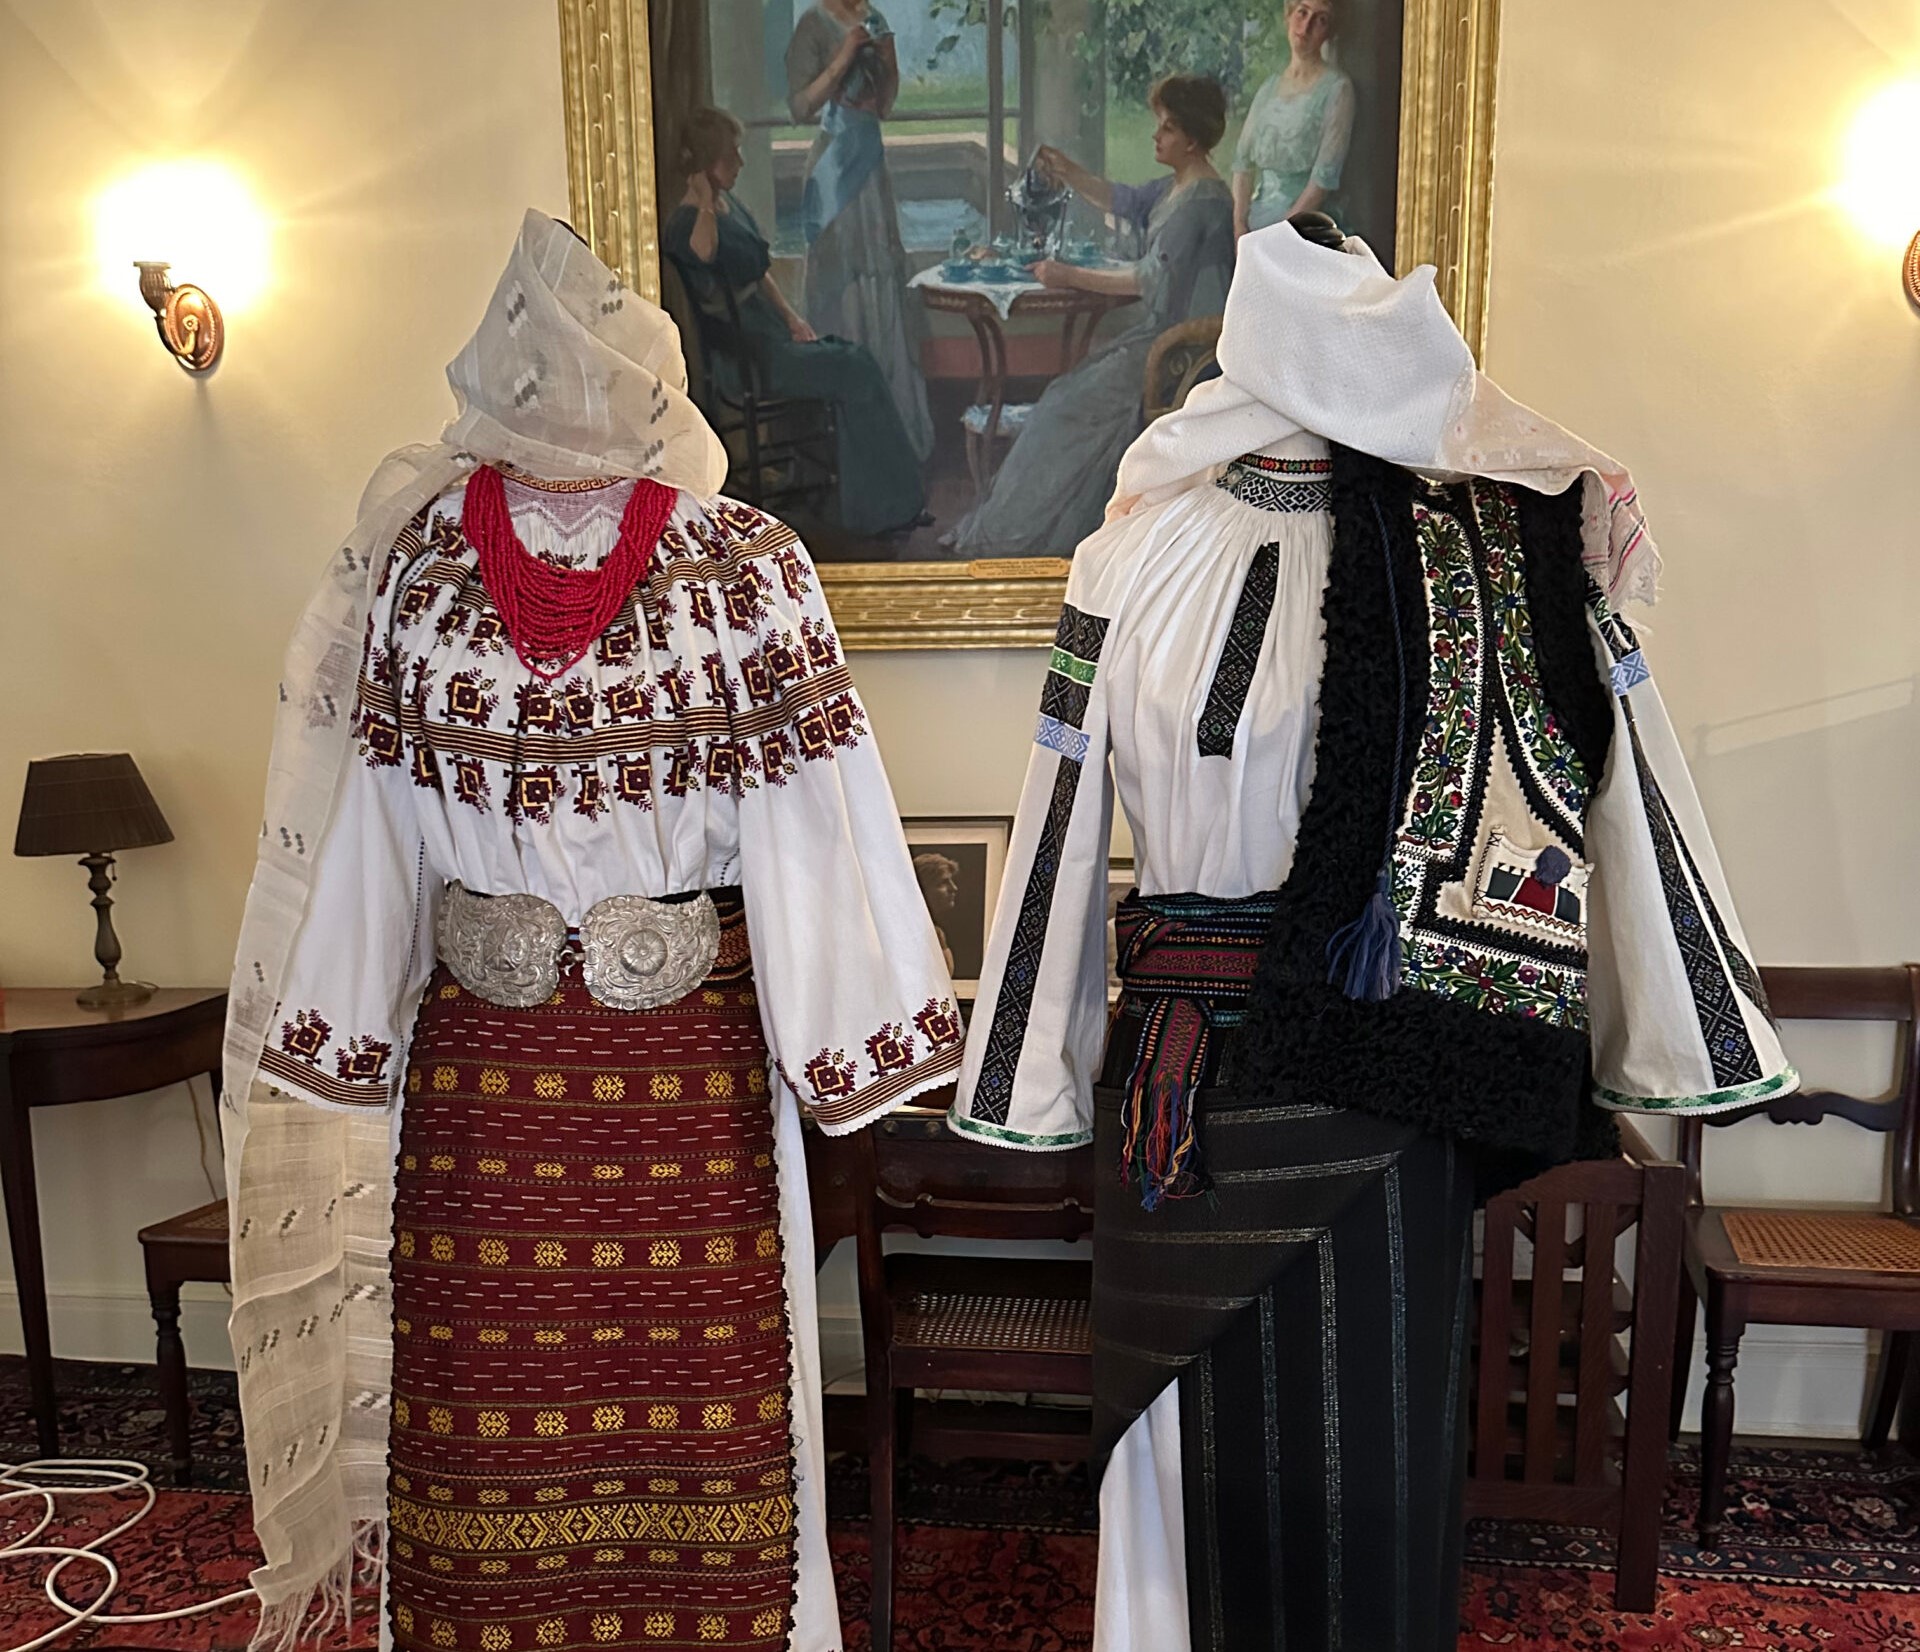 Folk costumes from Romania and Moldova featured in Washington DC exhibition